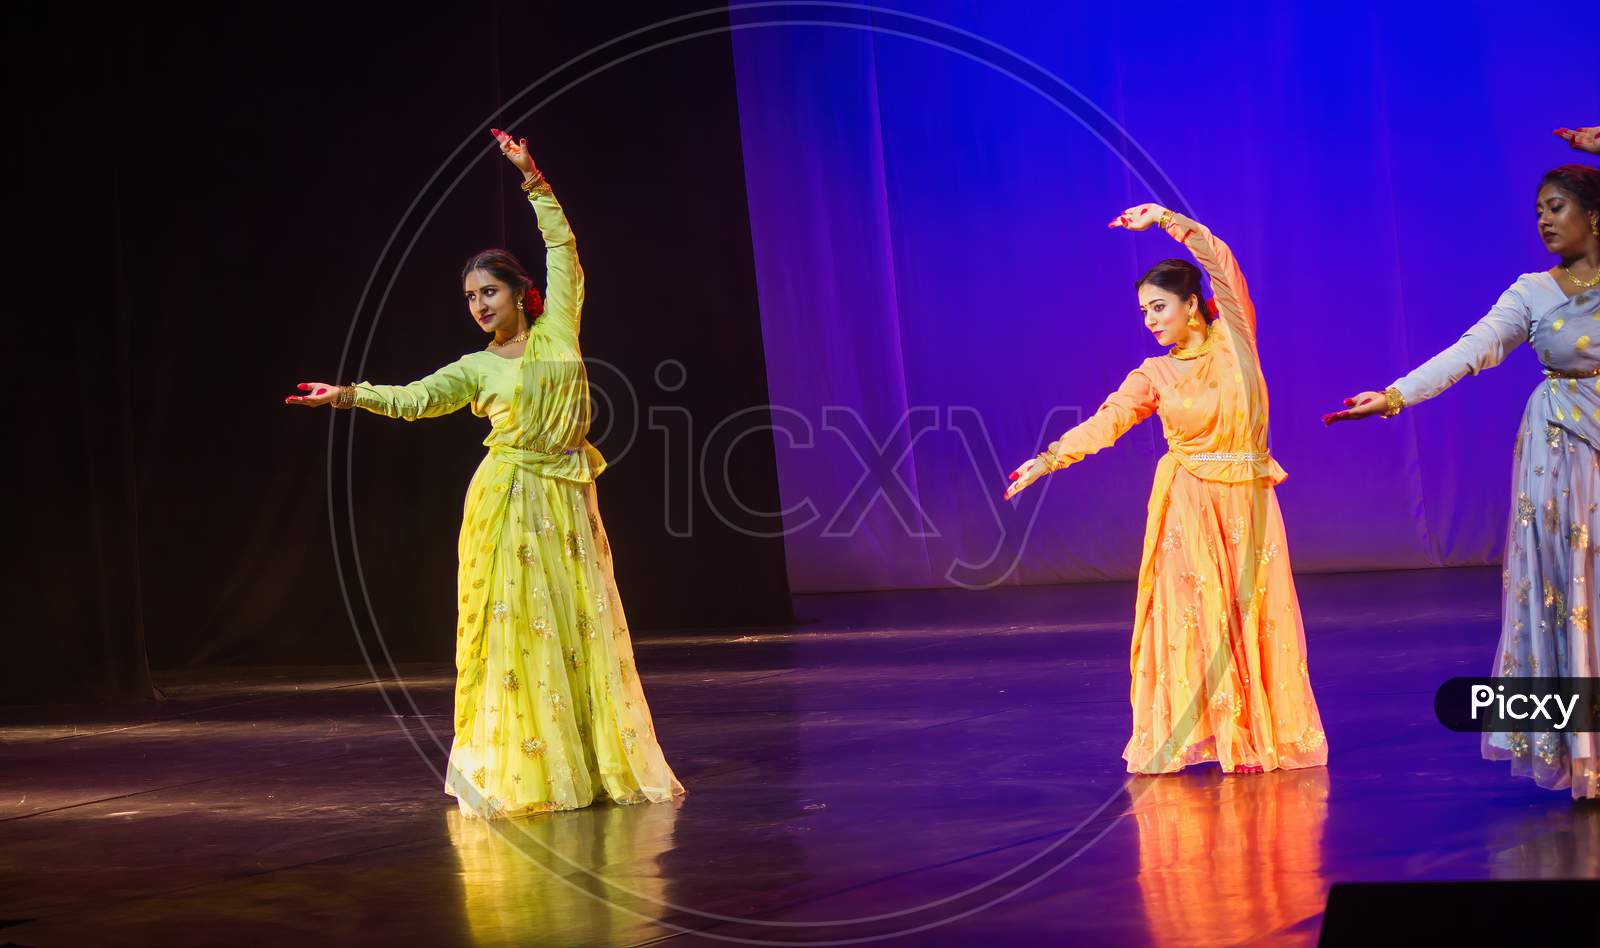 Krakow, Poland - April 01, 2019: Girls Dressed Up In Indian Traditional Dress And Performing Indian Classical Dance On Stage During Holi Event